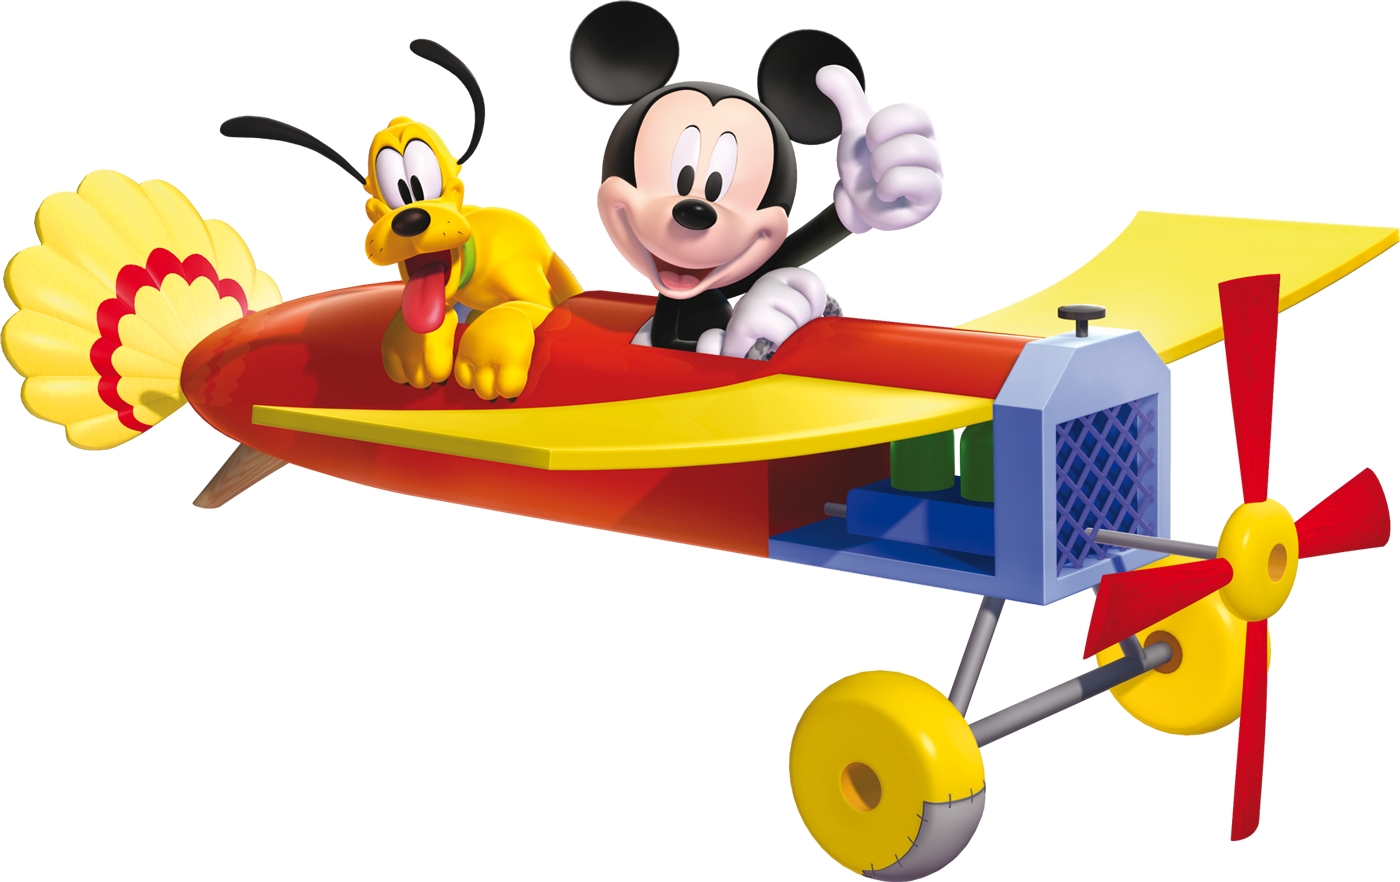 Mickey And Of Minnie Pluto Donald Starring PNG Image